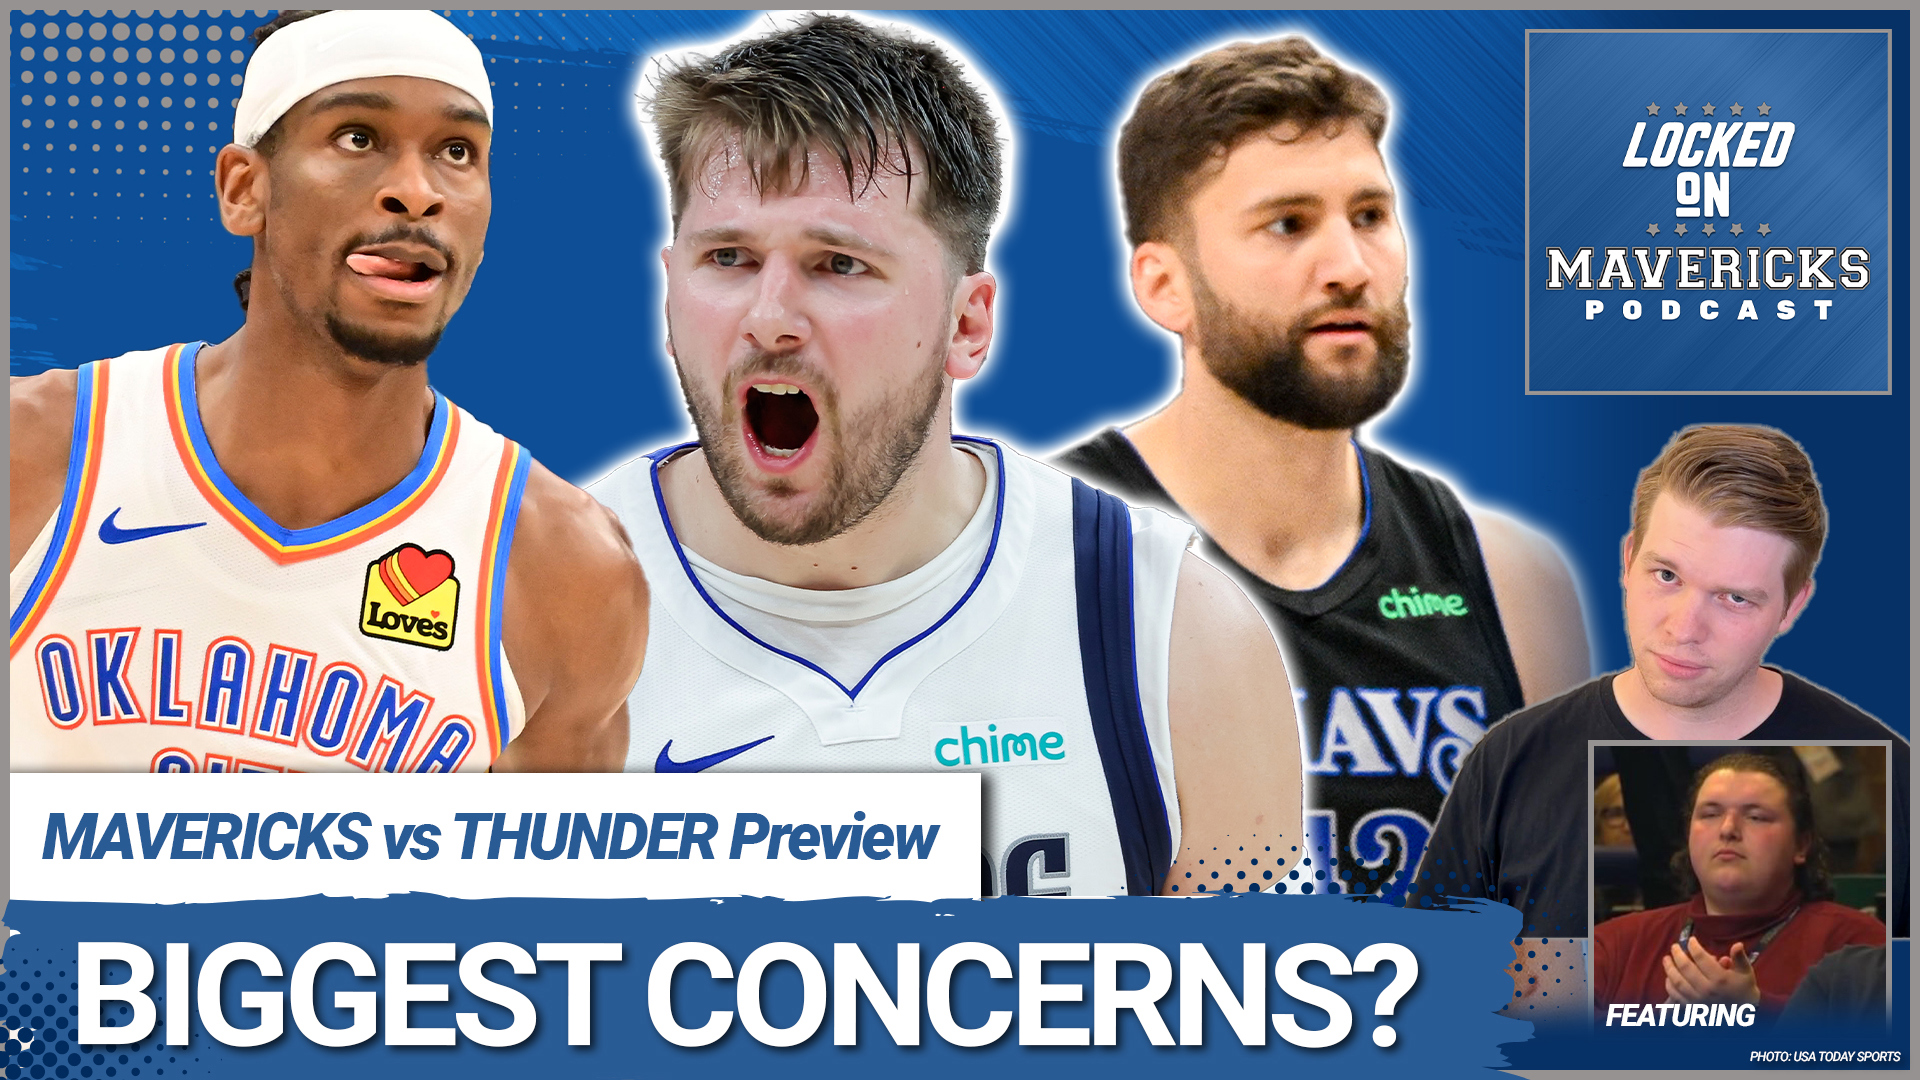 Nick Angstadt is joined by Rylan Stiles to discuss how the Mavs are different going into this 2nd Round series without Maxi Kleber and more.